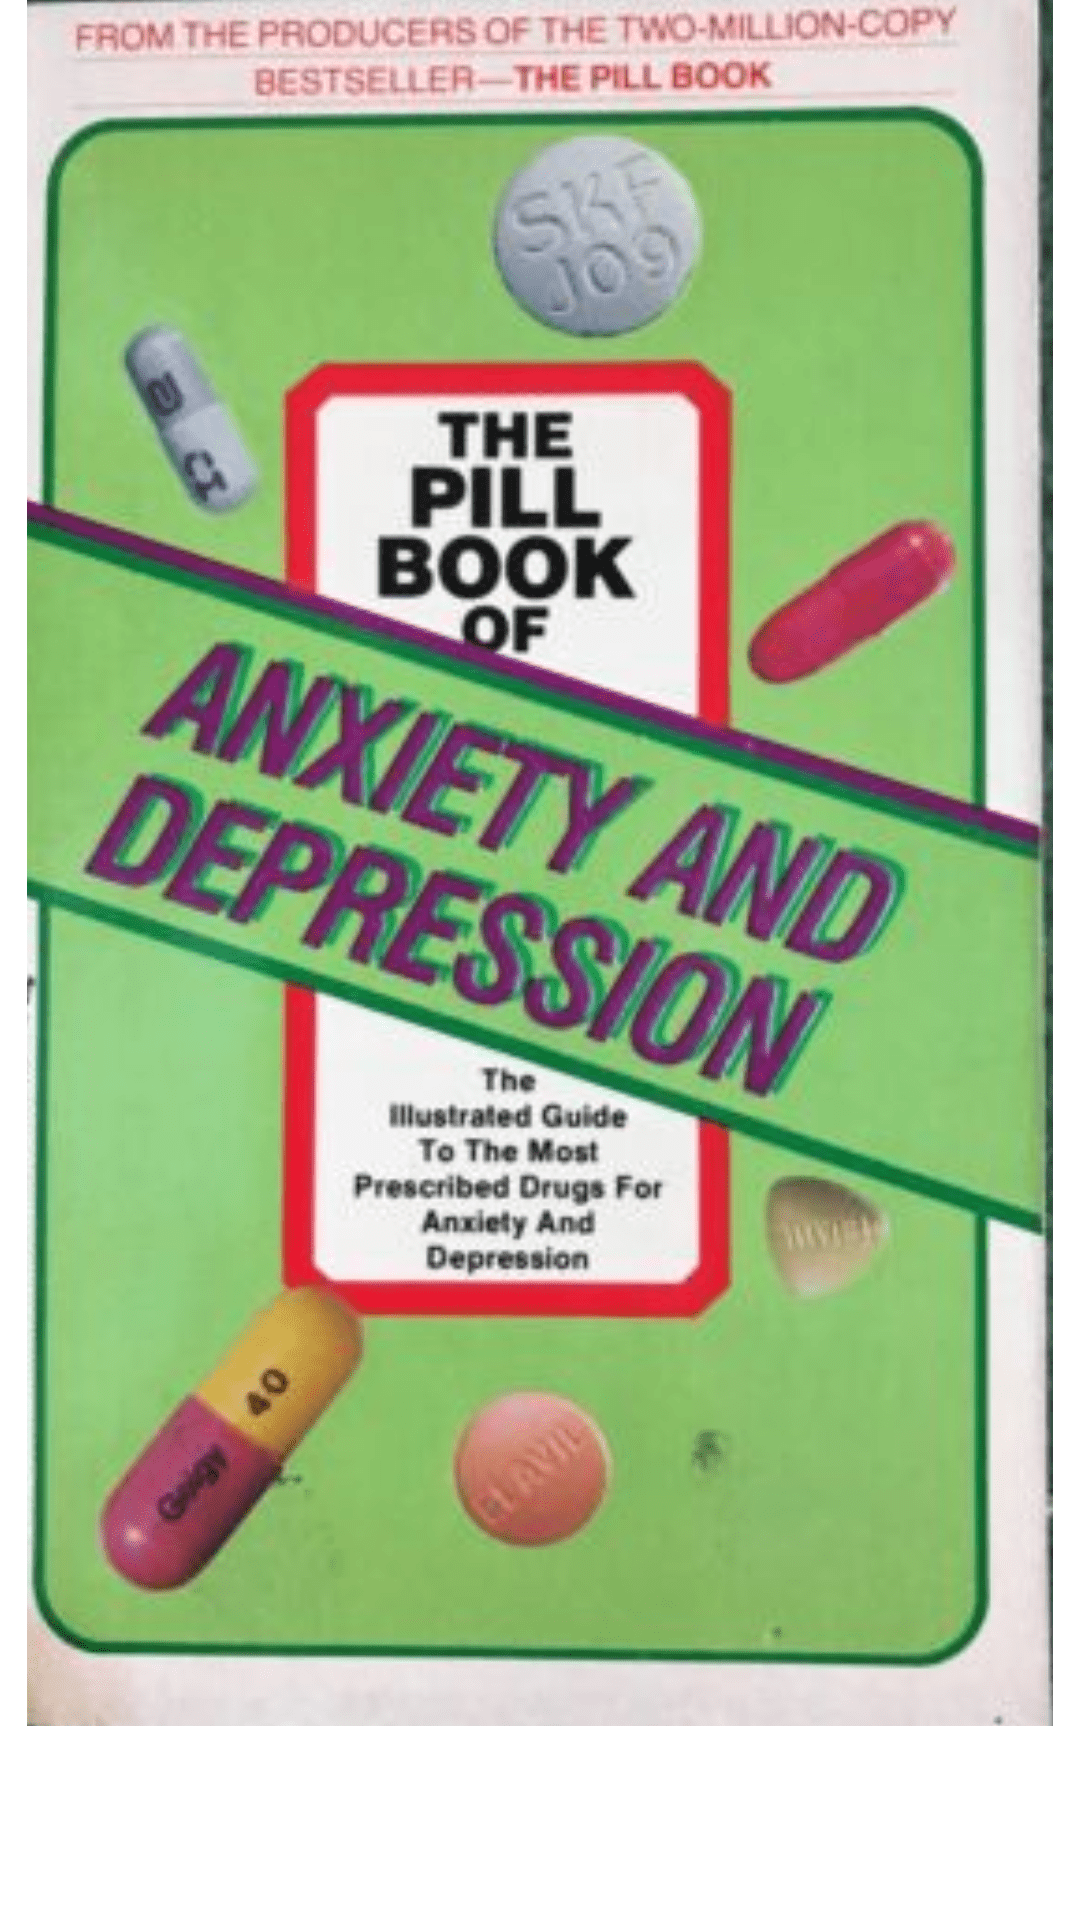 The Pill Book of Anxiety and Depression